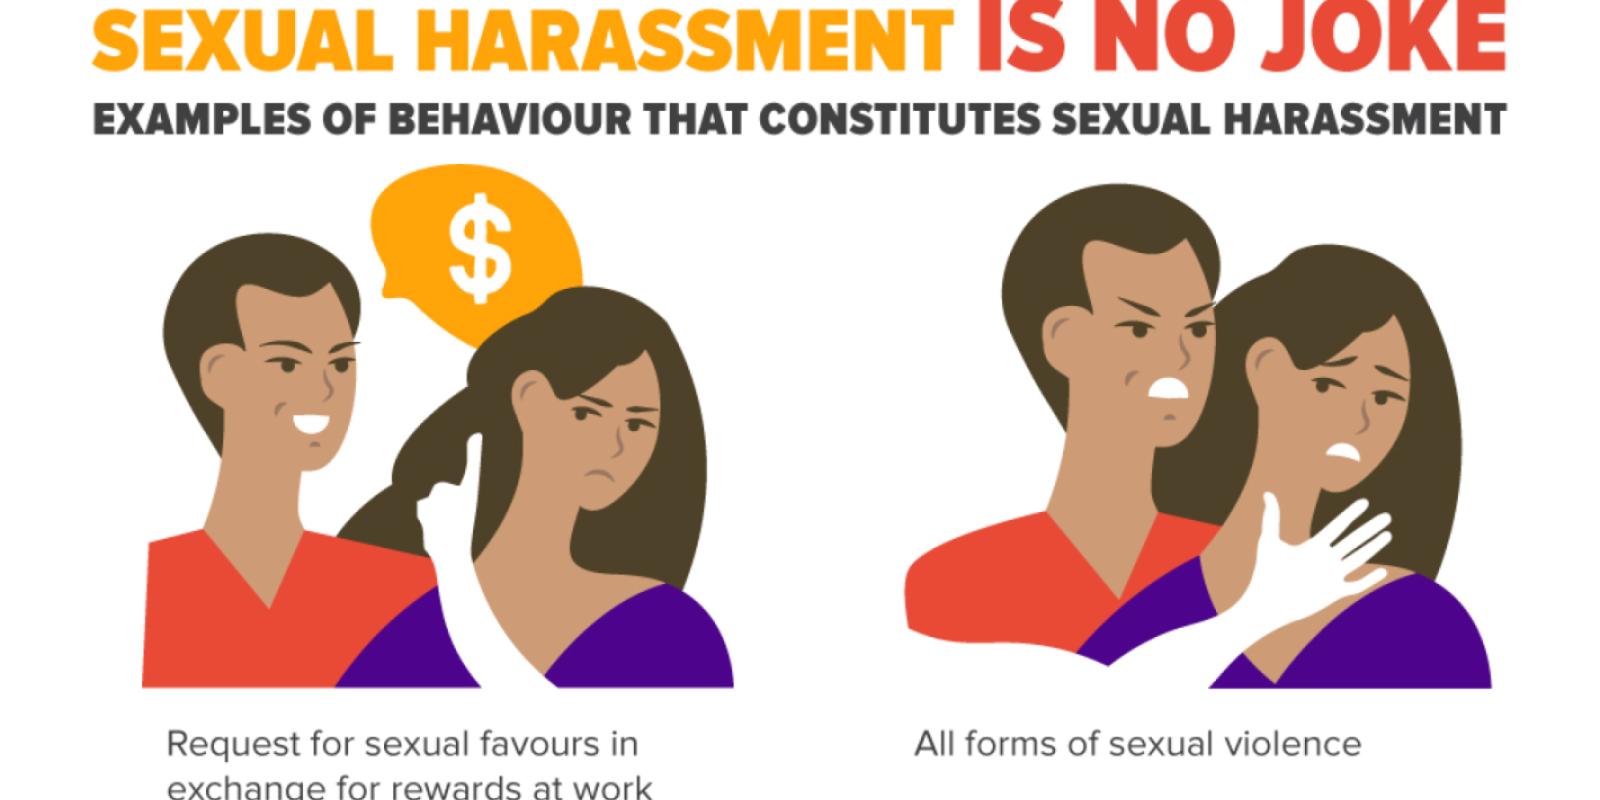 requests for sexual favours in exchange for rewards at work; and all forms of sexual violence